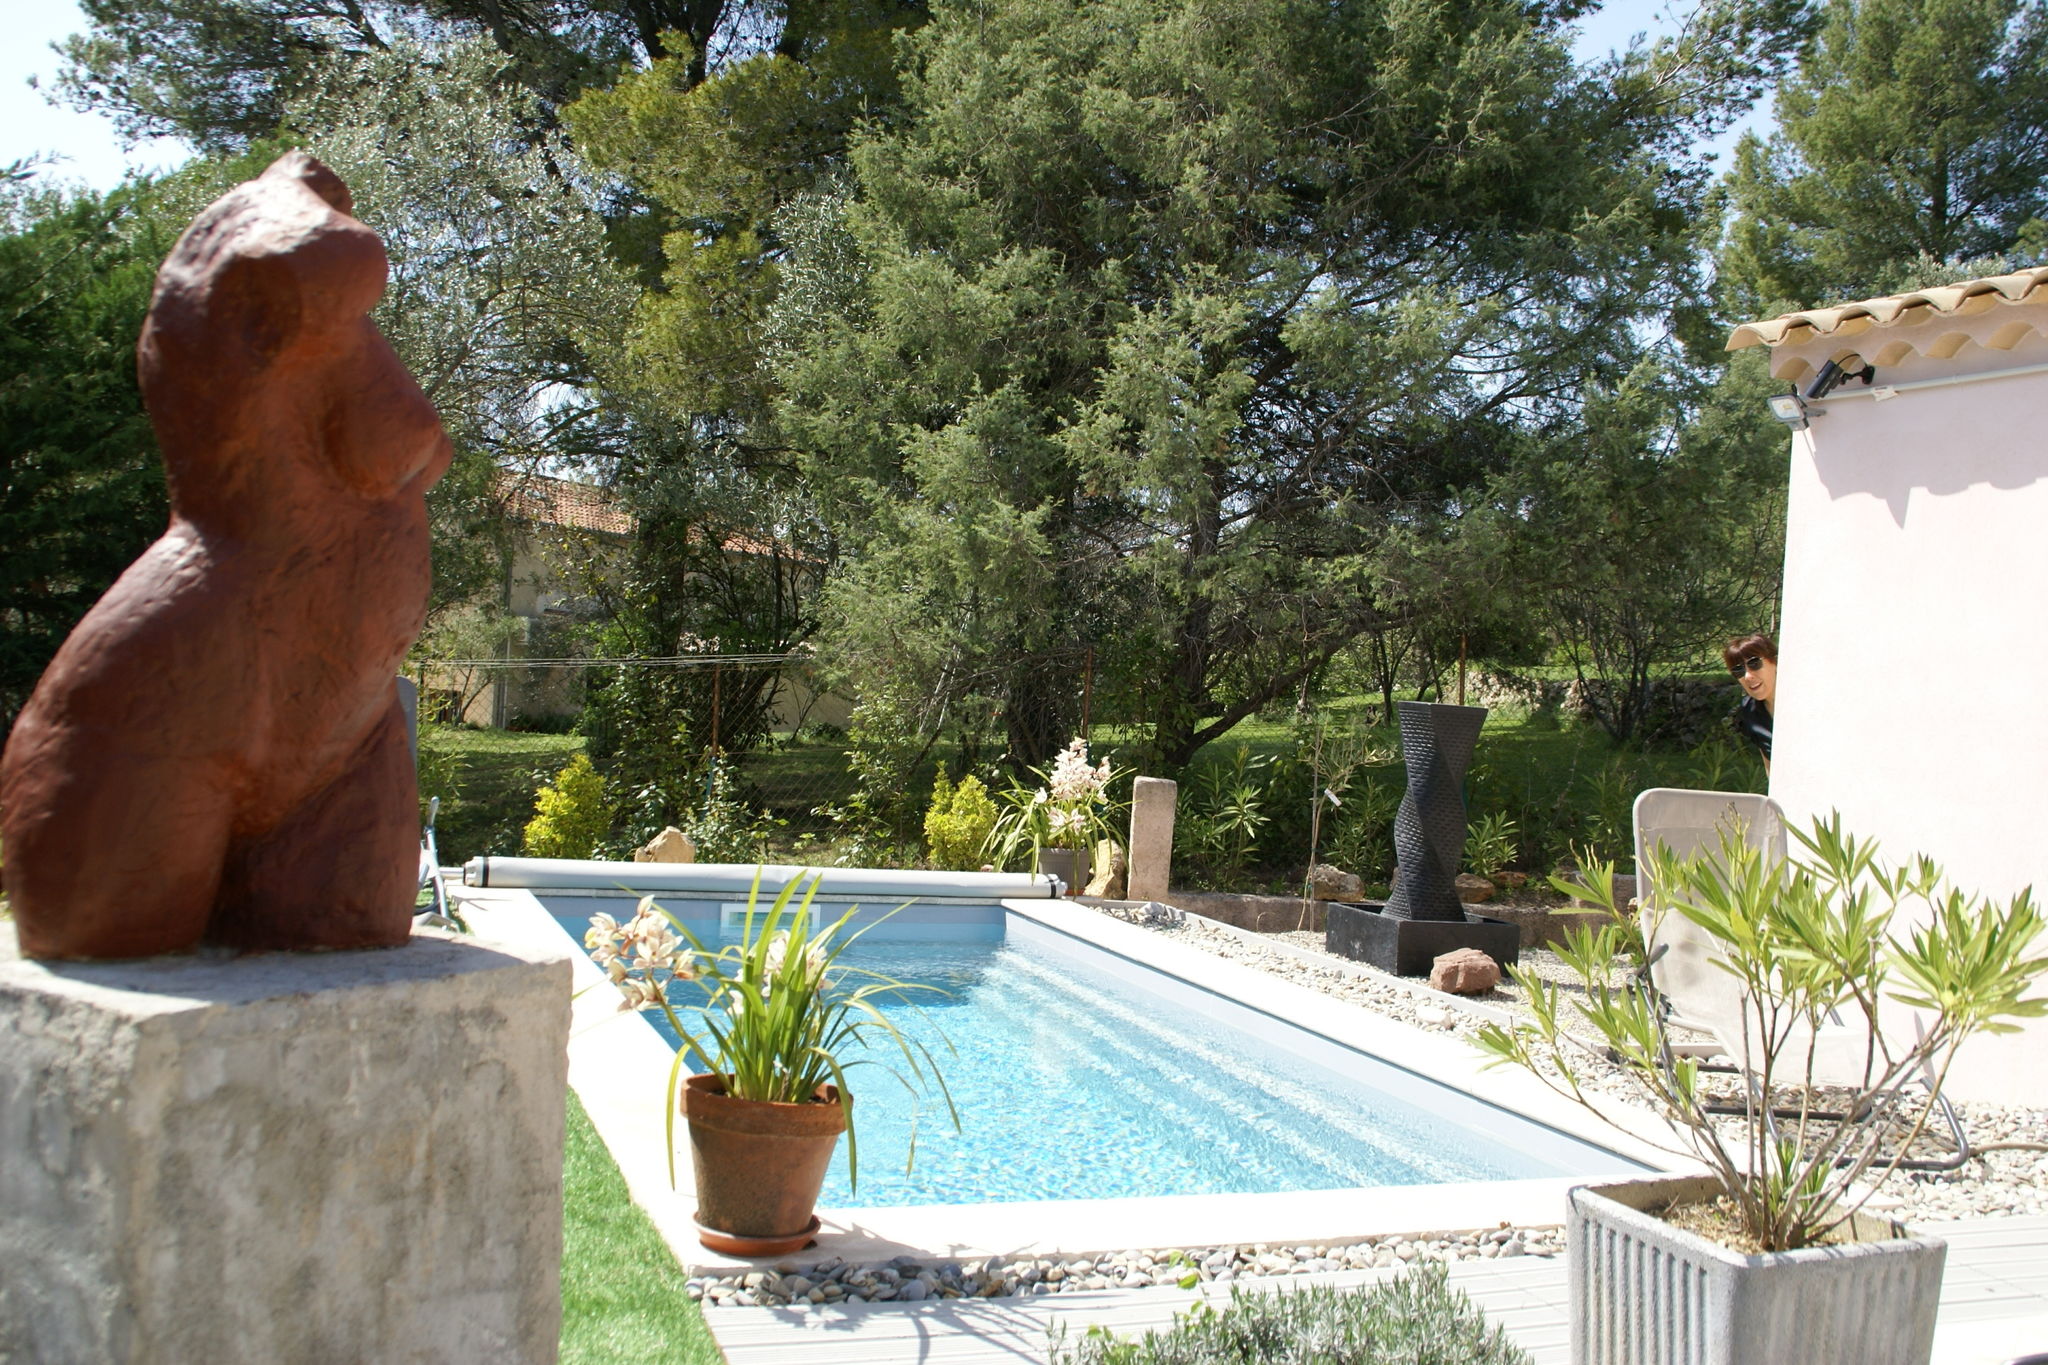 Romantic holiday home with a small private pool, located in the Provence.